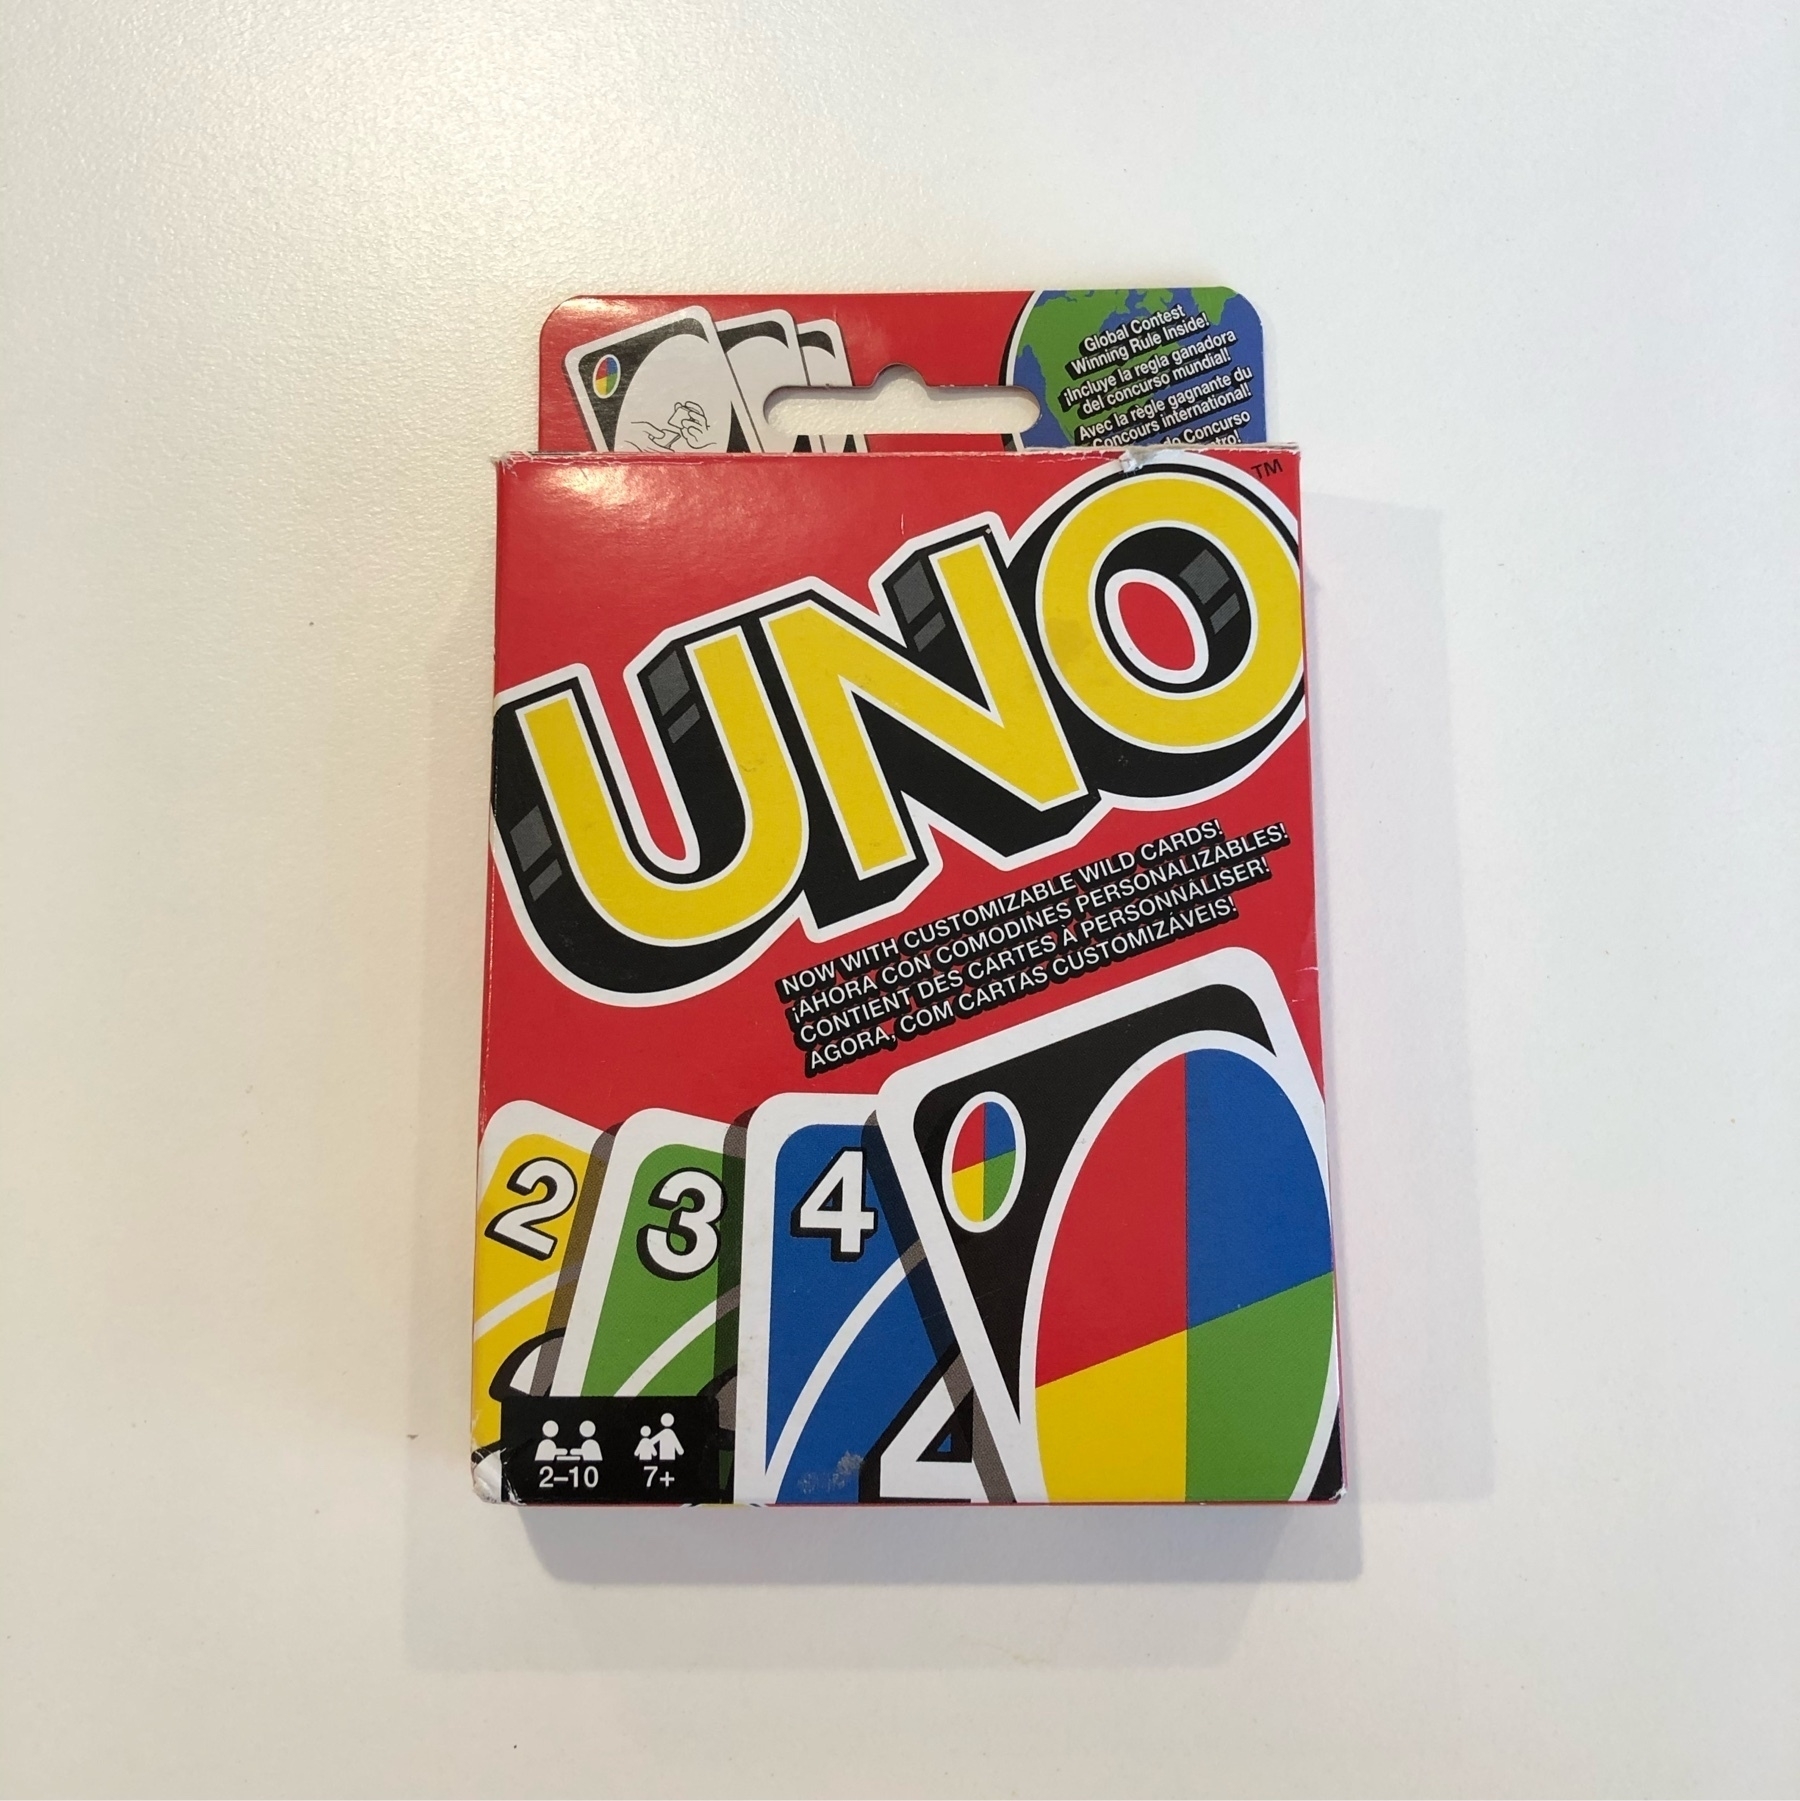 A box of Uno playing cards on a white table. The box is red with UNO in large yellow letters in the top half and the bottom has yellow, green and blue cards numbered 2, 3 and 4.